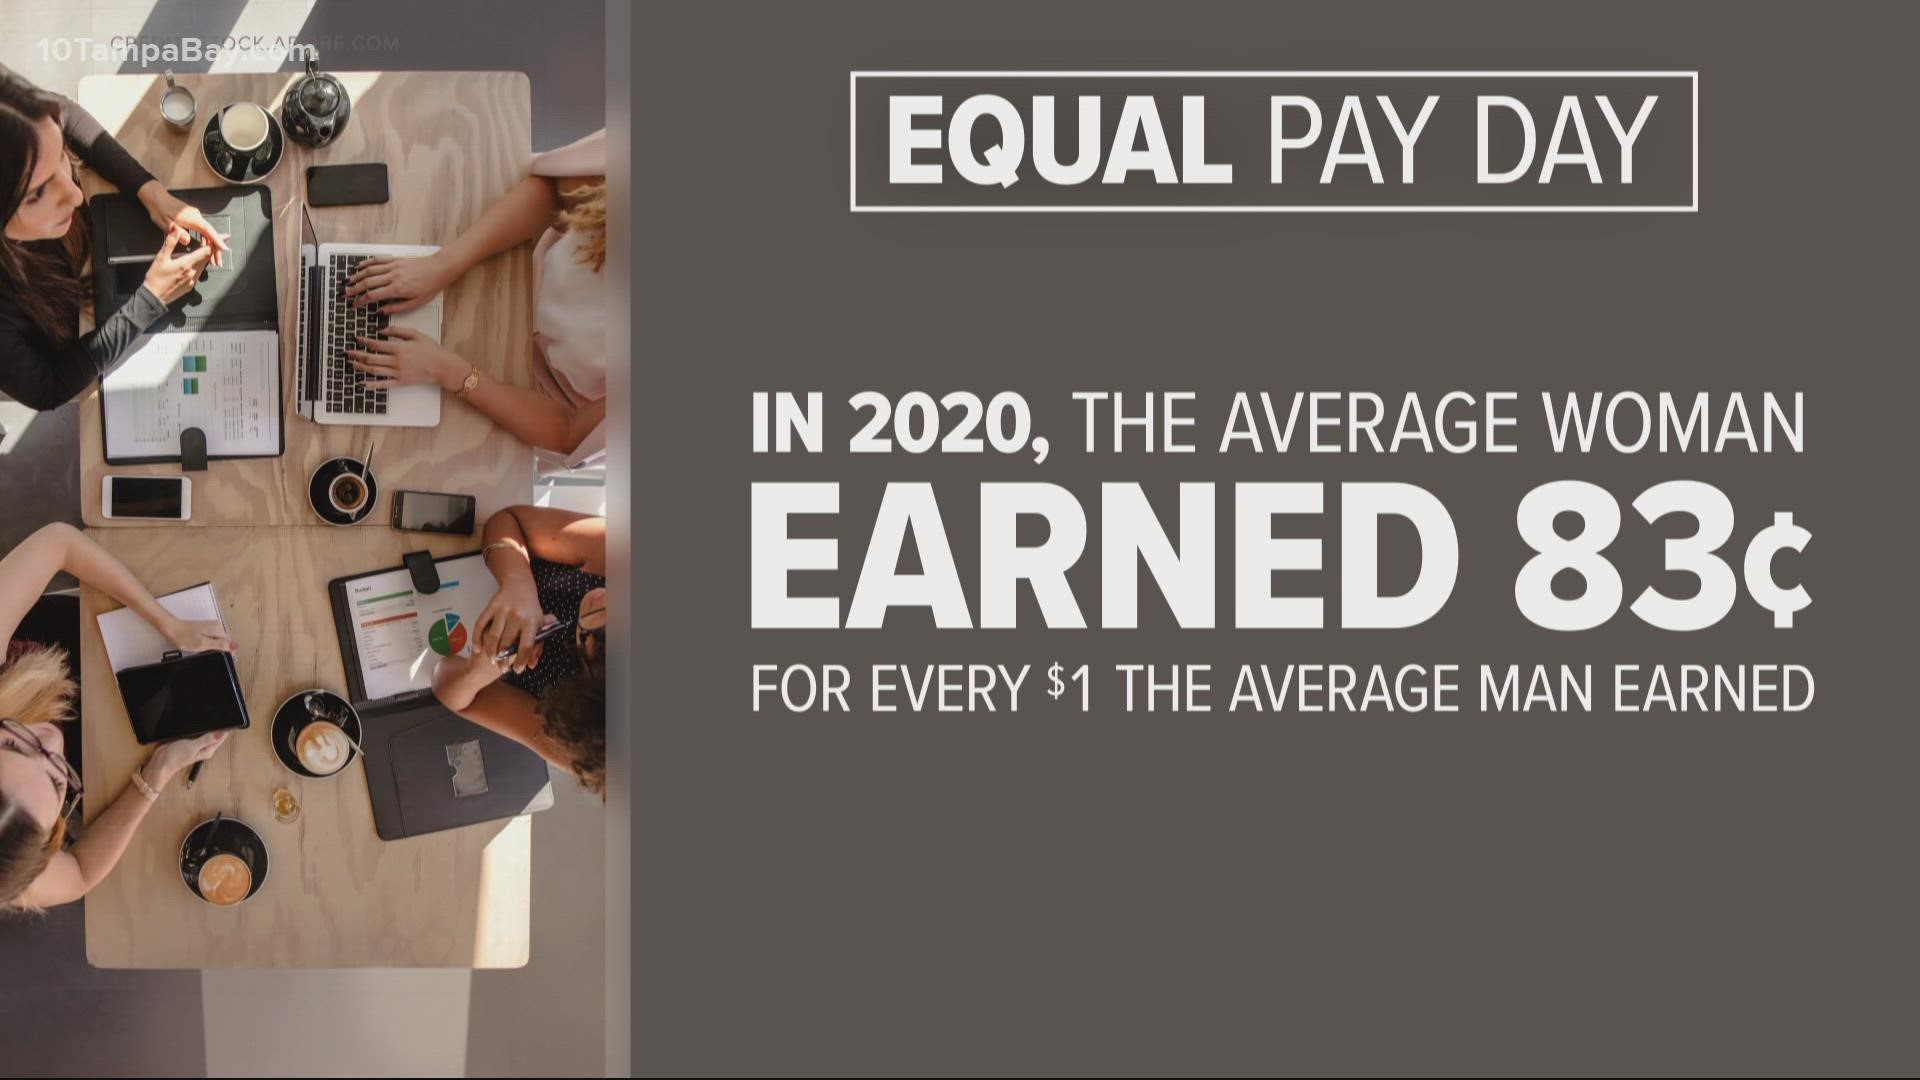 On Equal Pay Day, here's how you can make your money work for you and your goals.